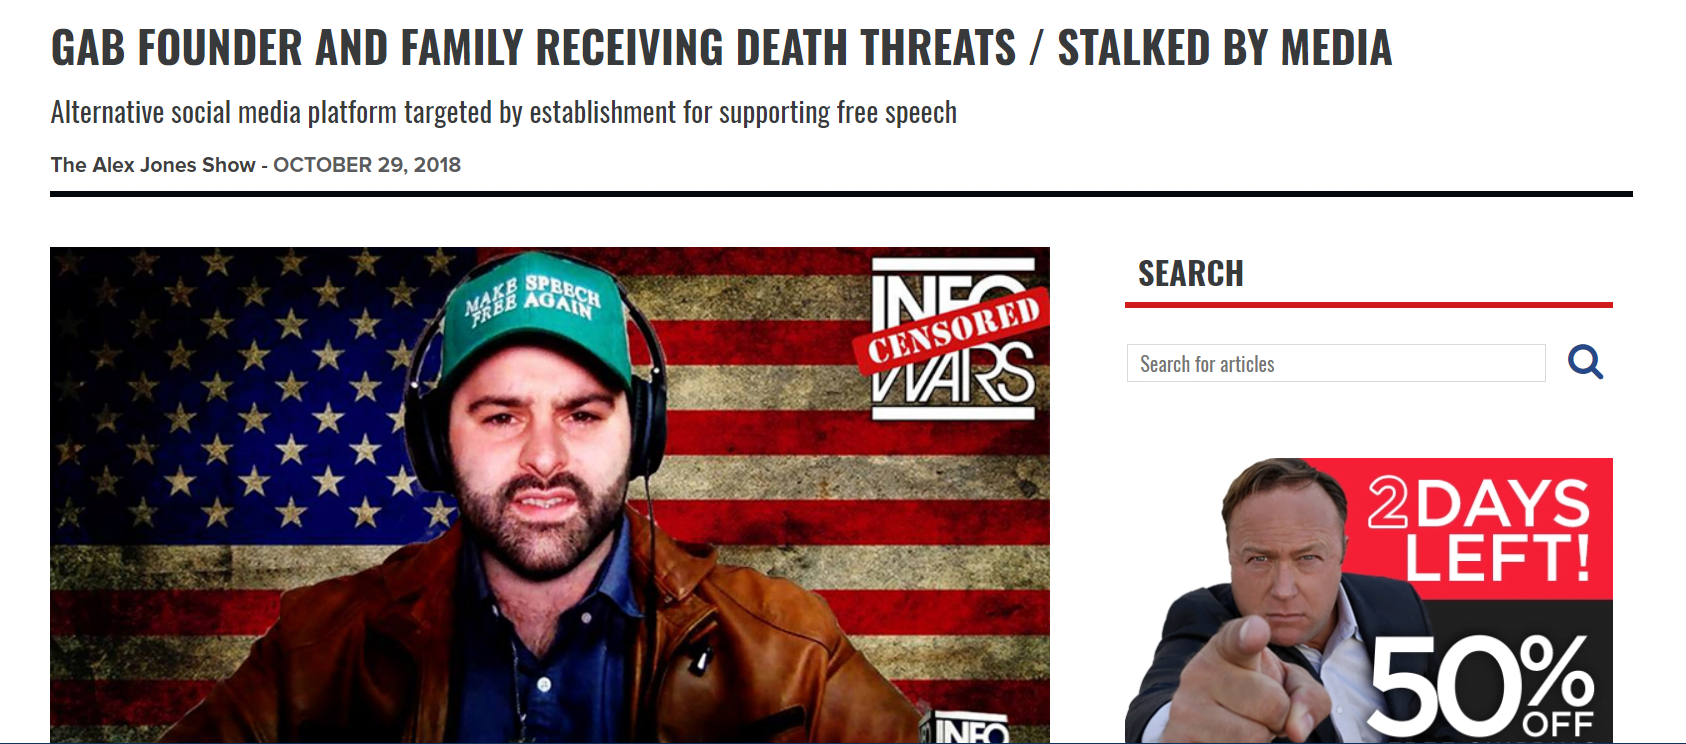 Infowars Claims That Gab Ceo Is Receiving Death Threats